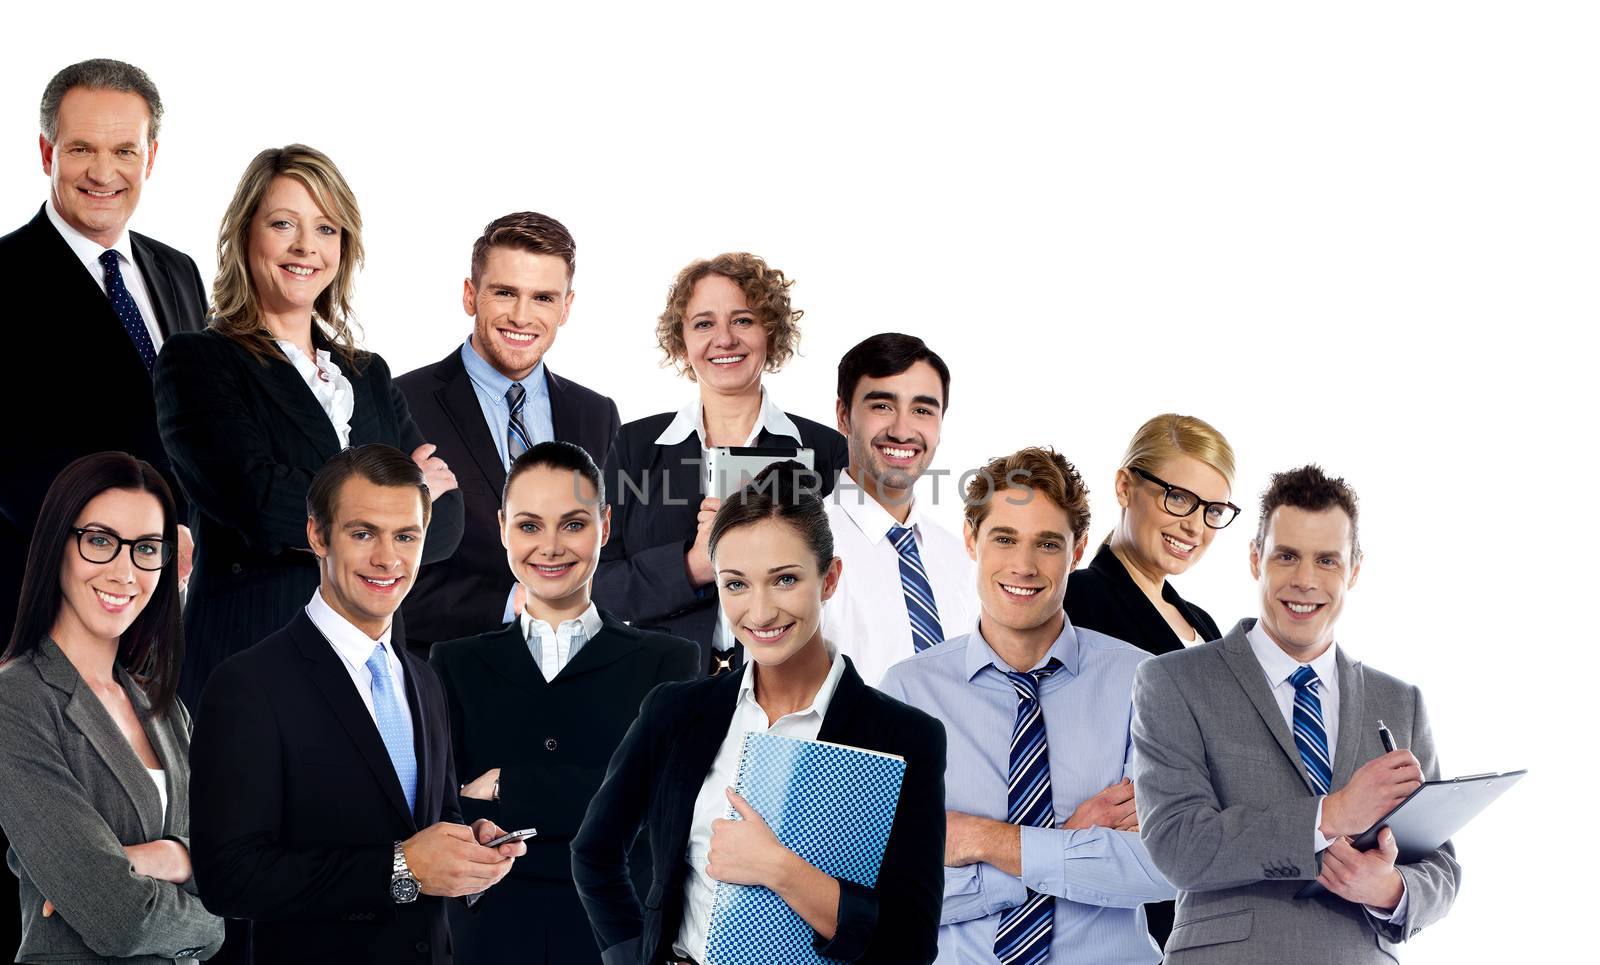 Large group of business people